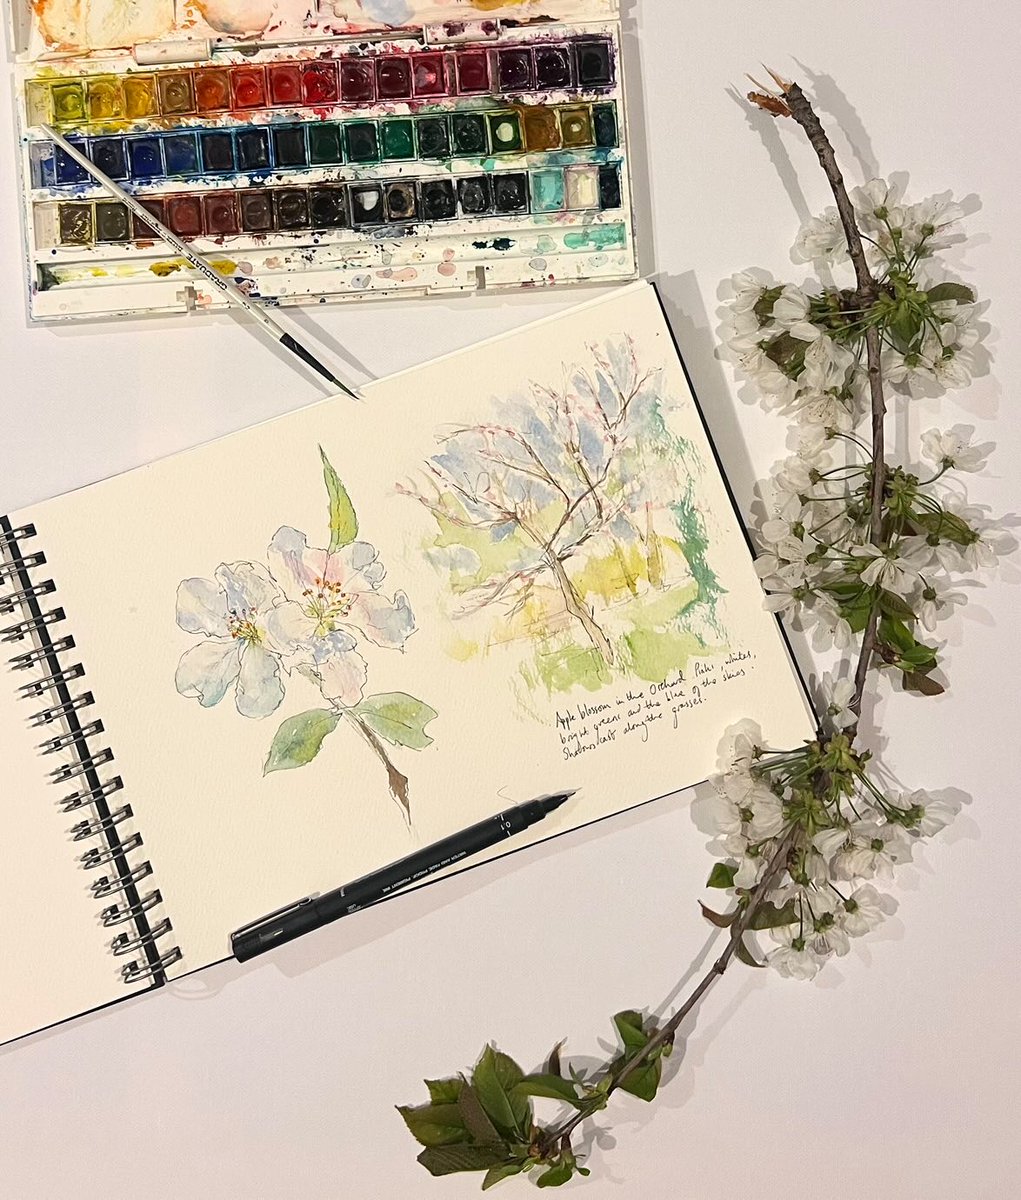 We are extremely excited to announce a new element to our blossom walk on Saturday 4th May! Our wonderful friend and artist Abigail Devenny is coming along to the farm with a canvas, an easel and paints to capture blossom-time.